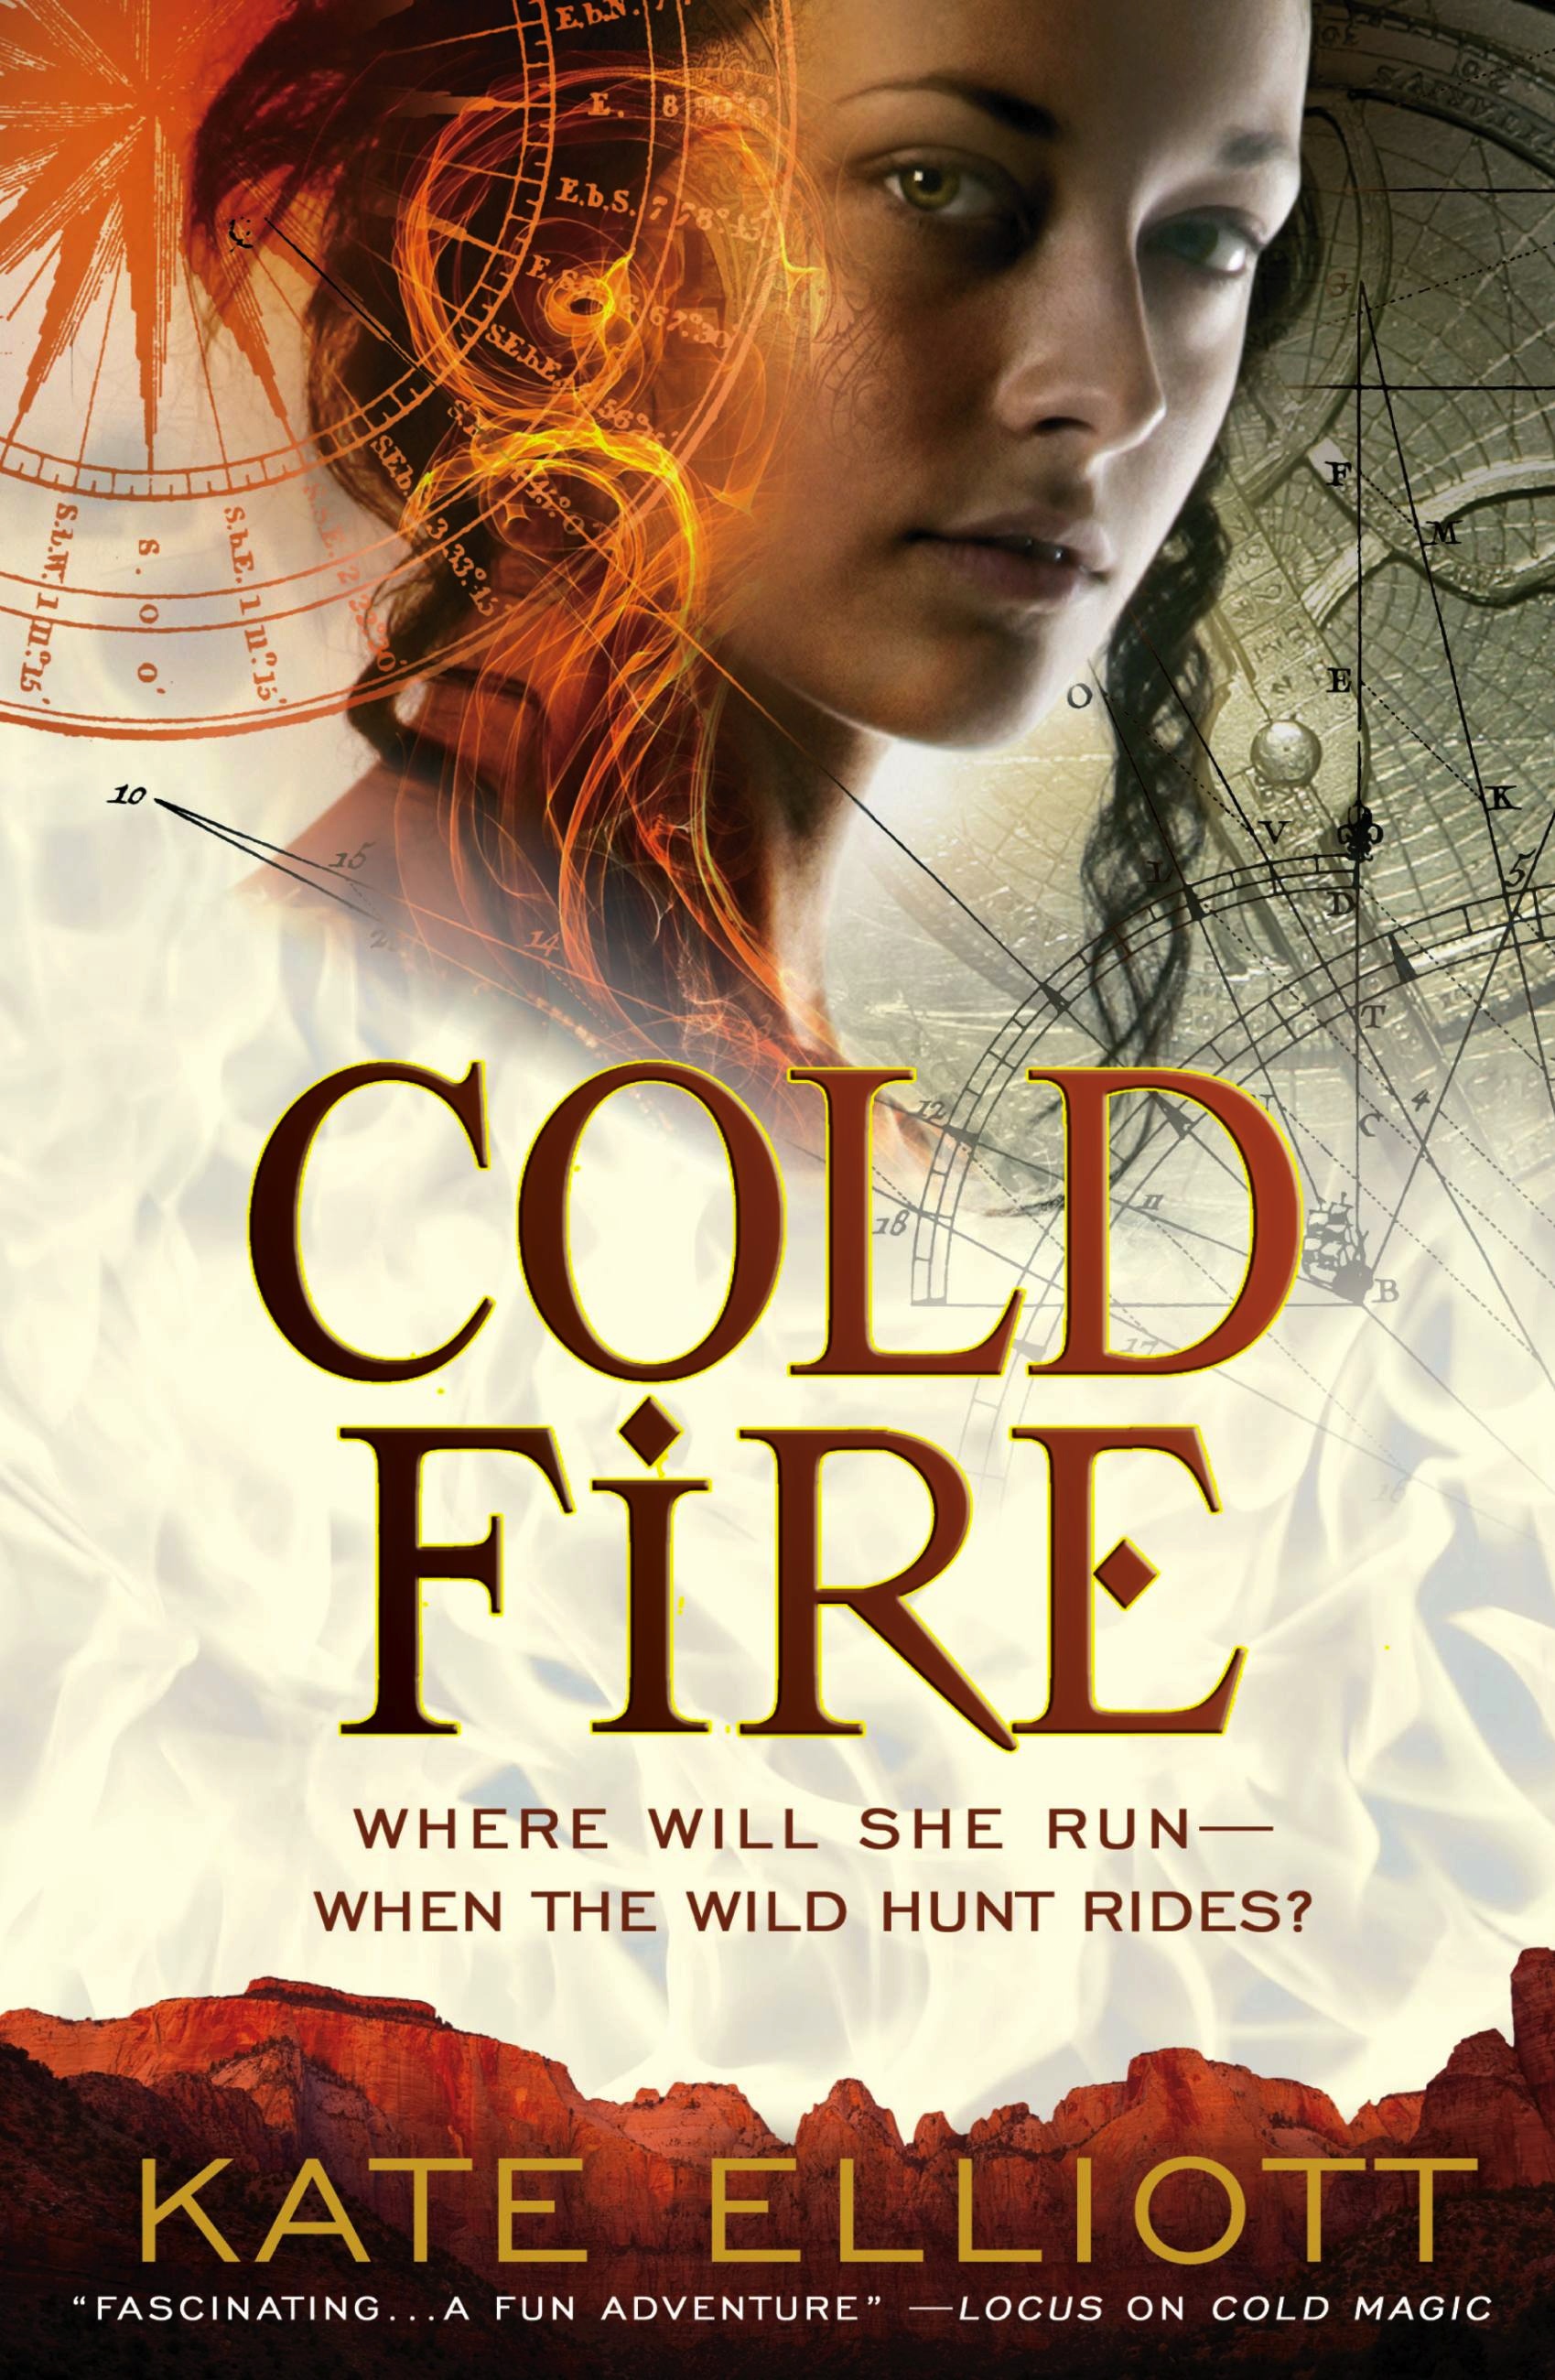 Book　Fire　Cold　Elliott　Hachette　by　Kate　Group